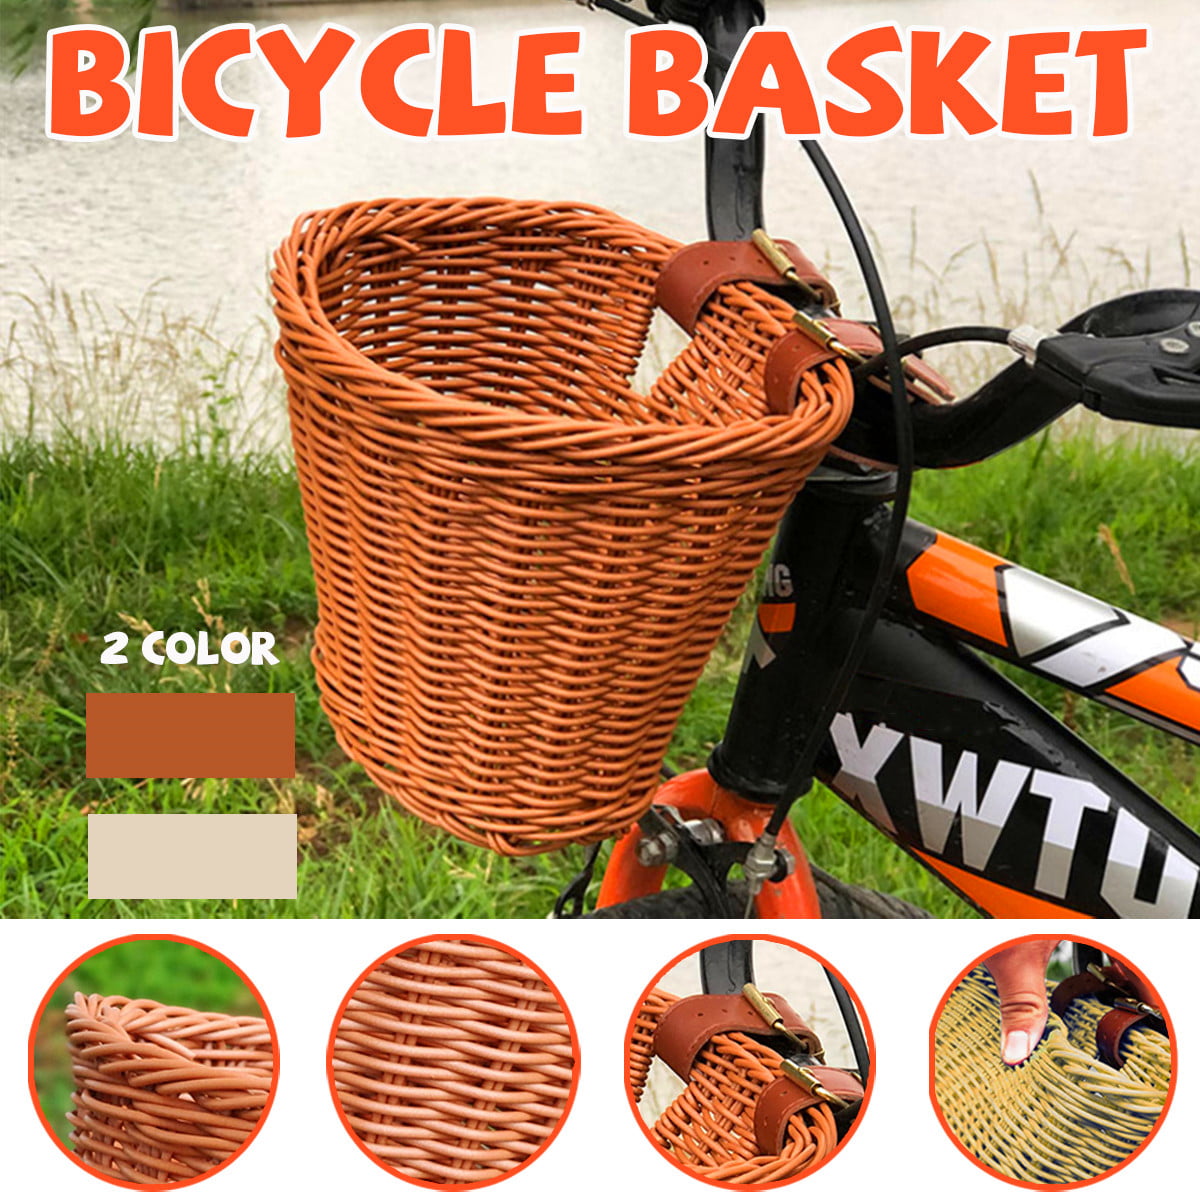 Wicker Leather Straps Shopping Box Childrens Cycle Kids Bike Bicycle Basket